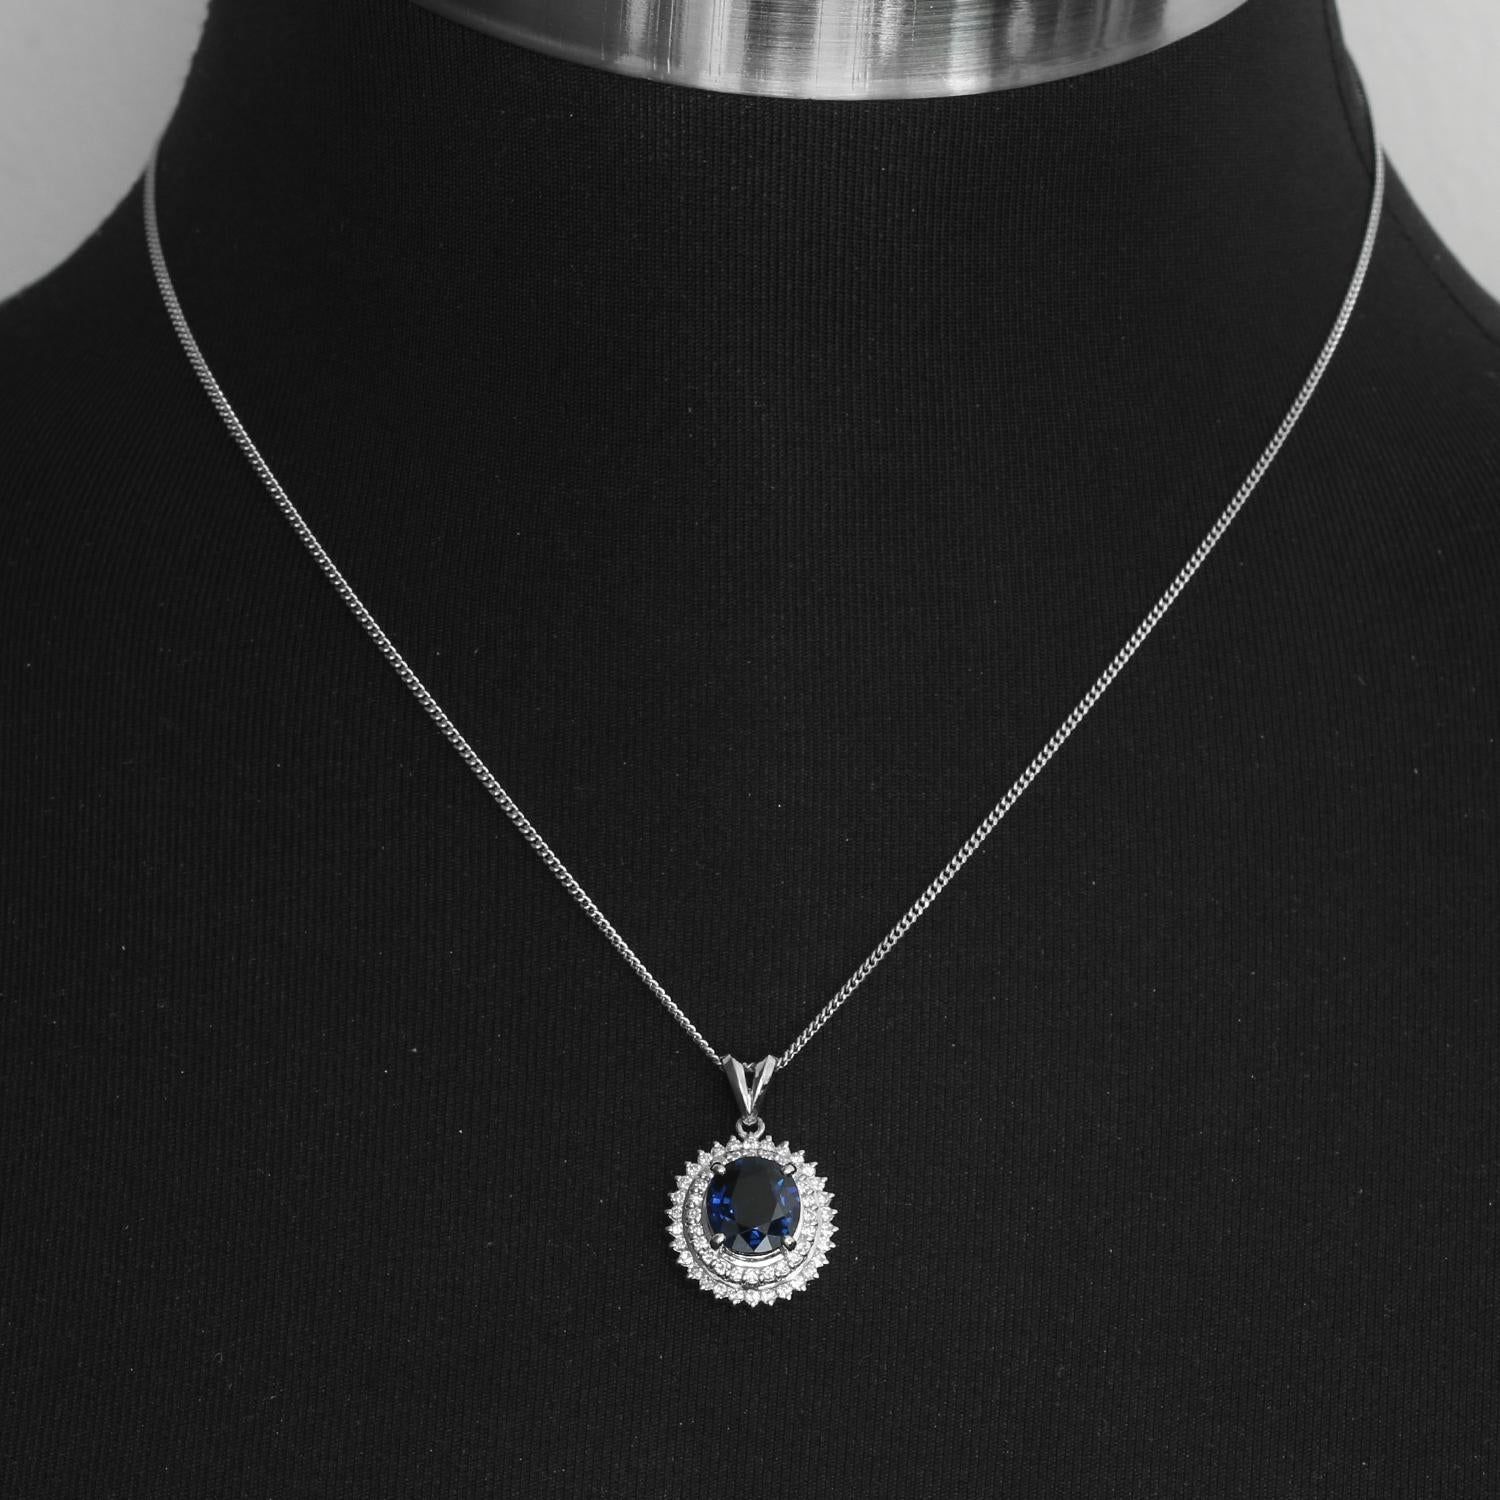 Sapphire Halo and Diamond on Platinum Mounting Necklace  - Round Sapphire weighing 2.69 cts. surrounded by .49 cts of diamond set in platinum. Necklace length 16 inches. Pendant  measures 1/2 inch. .